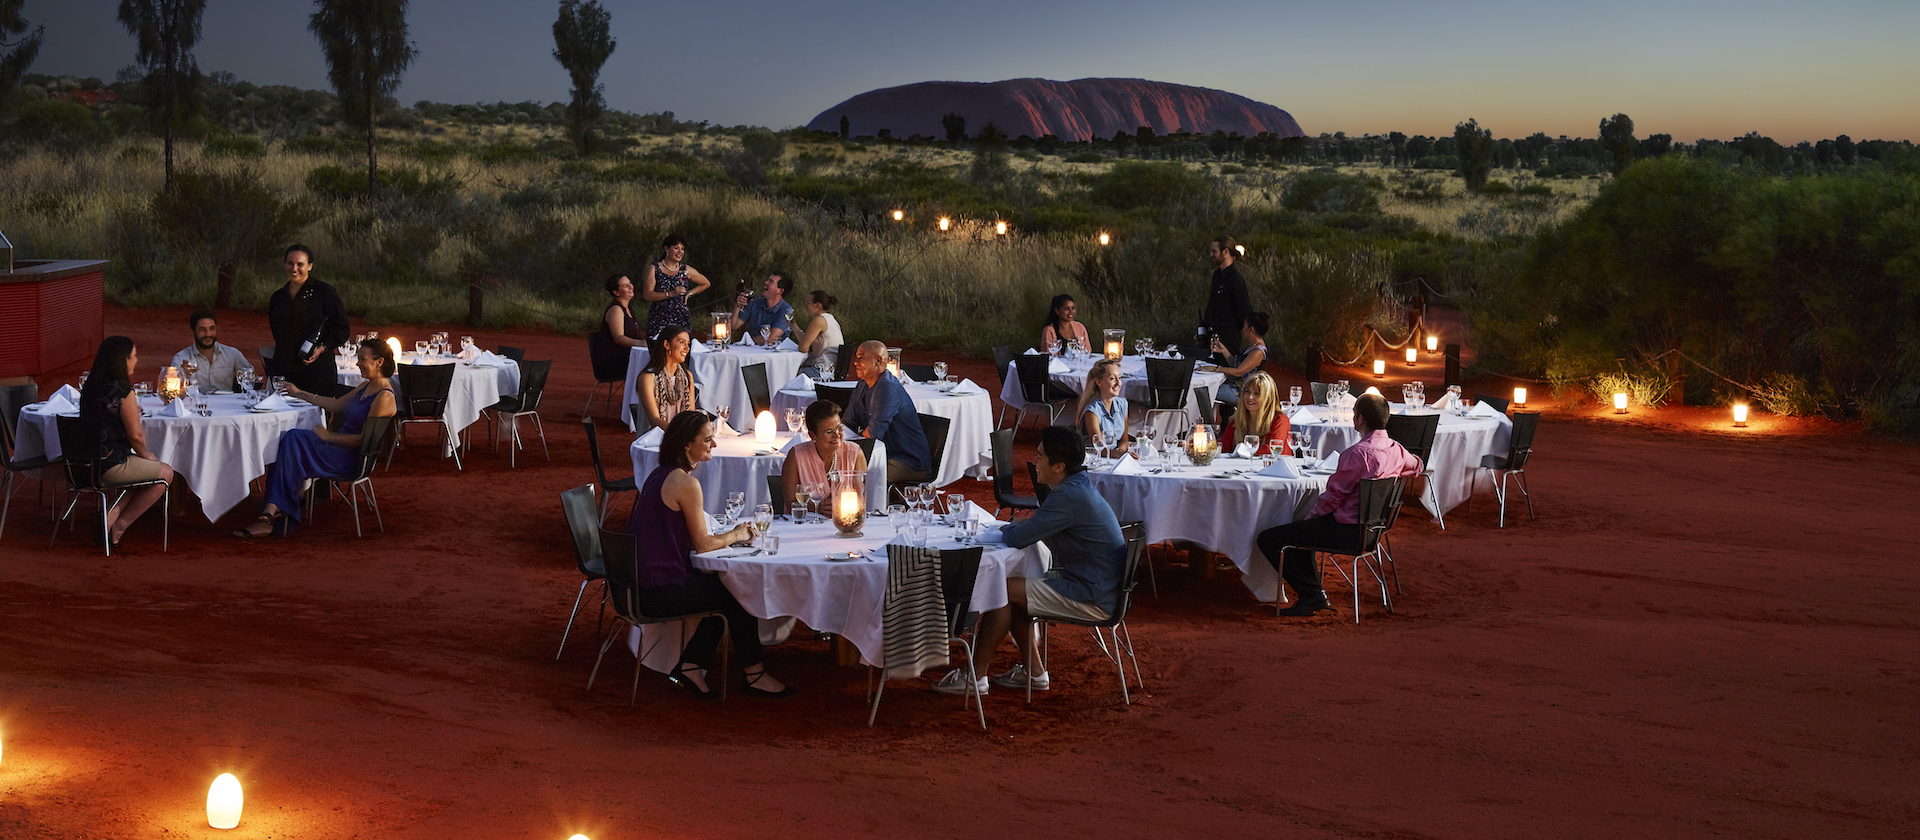 Opera in the Outback